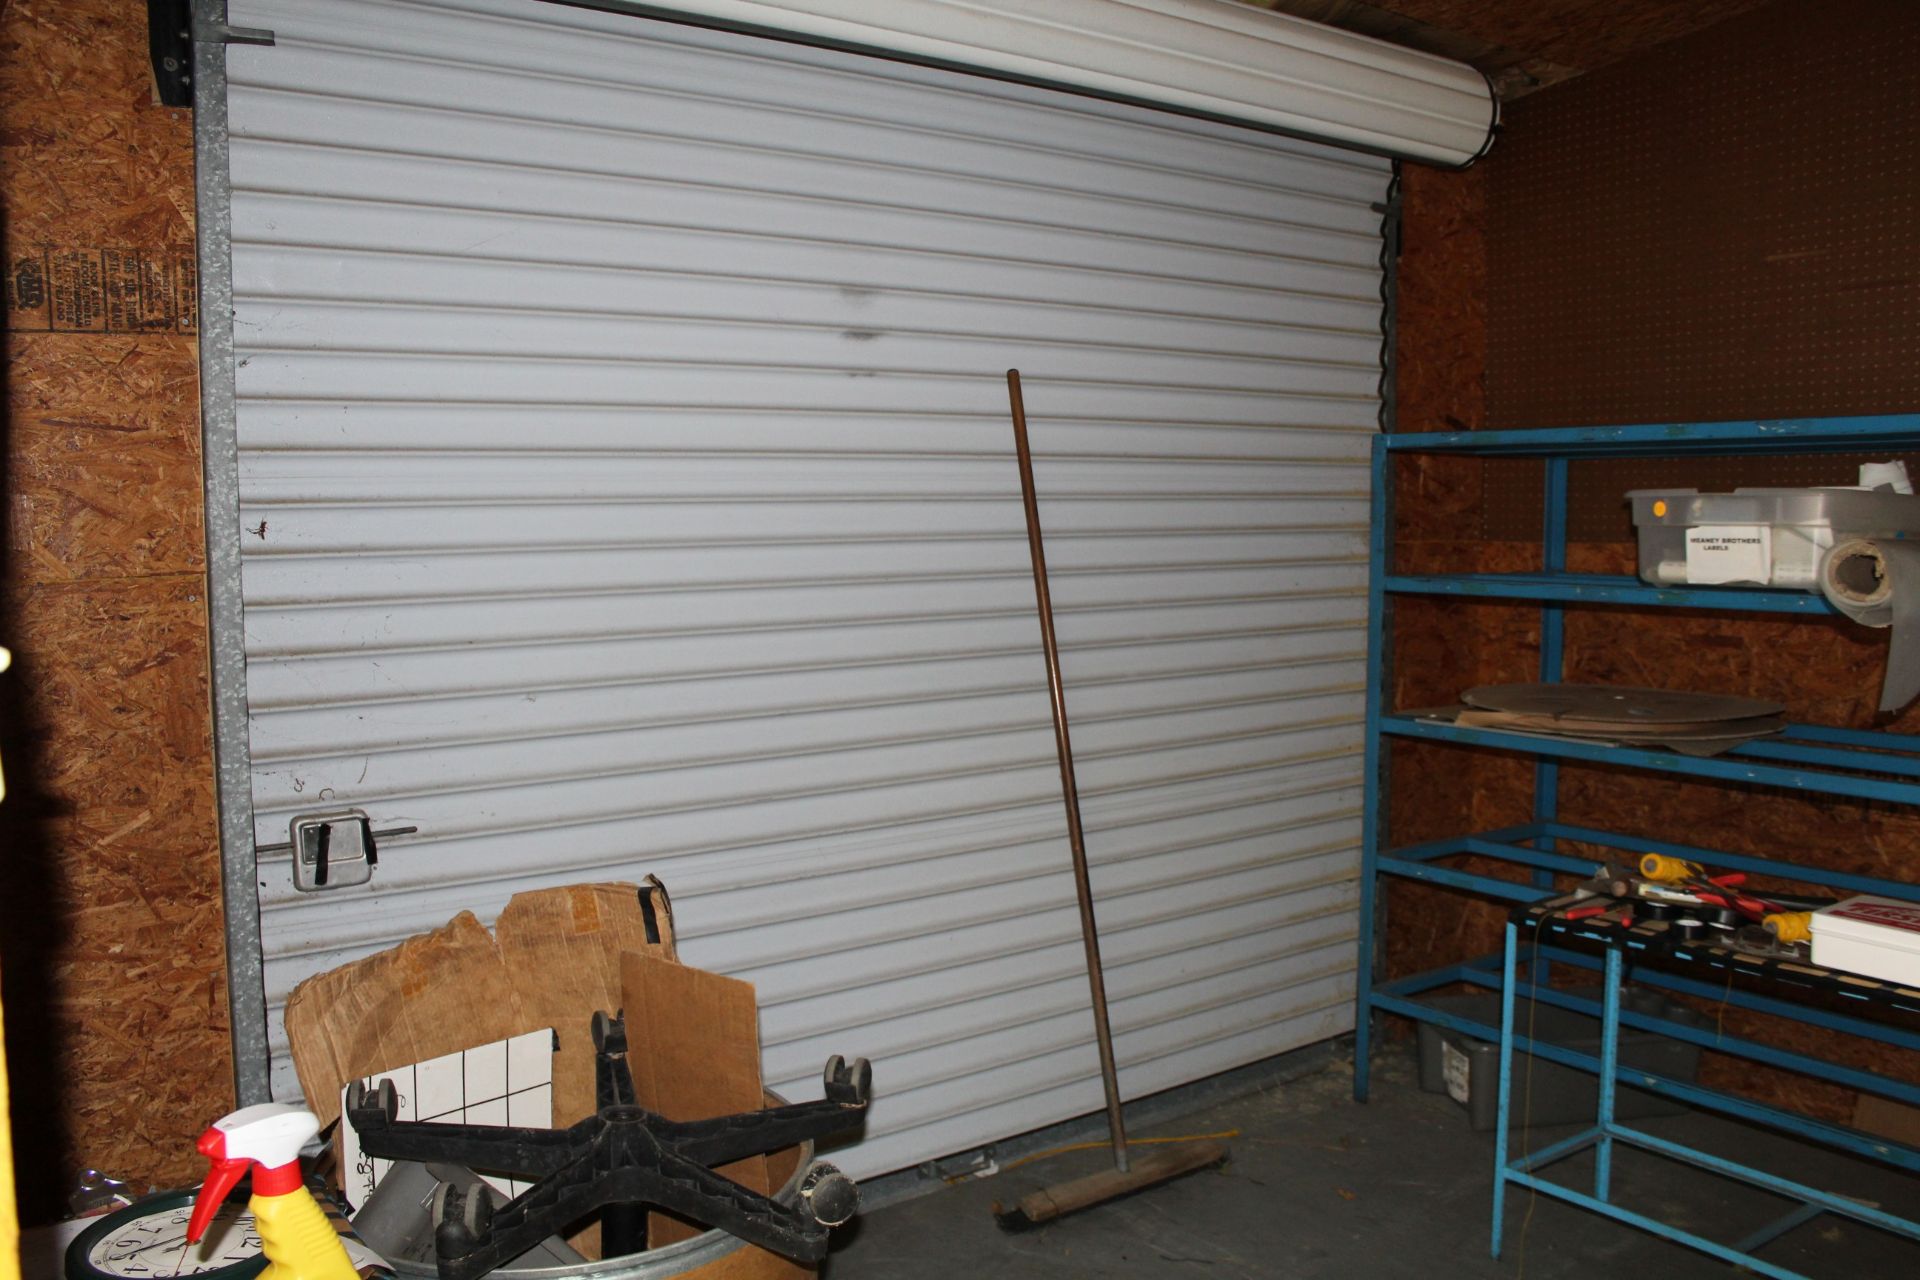 Thrifty Metal Sided 10 x 16 Storage Building w/ Contents, (6) Chairs, Fan, (3) Electric Heaters, (2) - Image 5 of 5